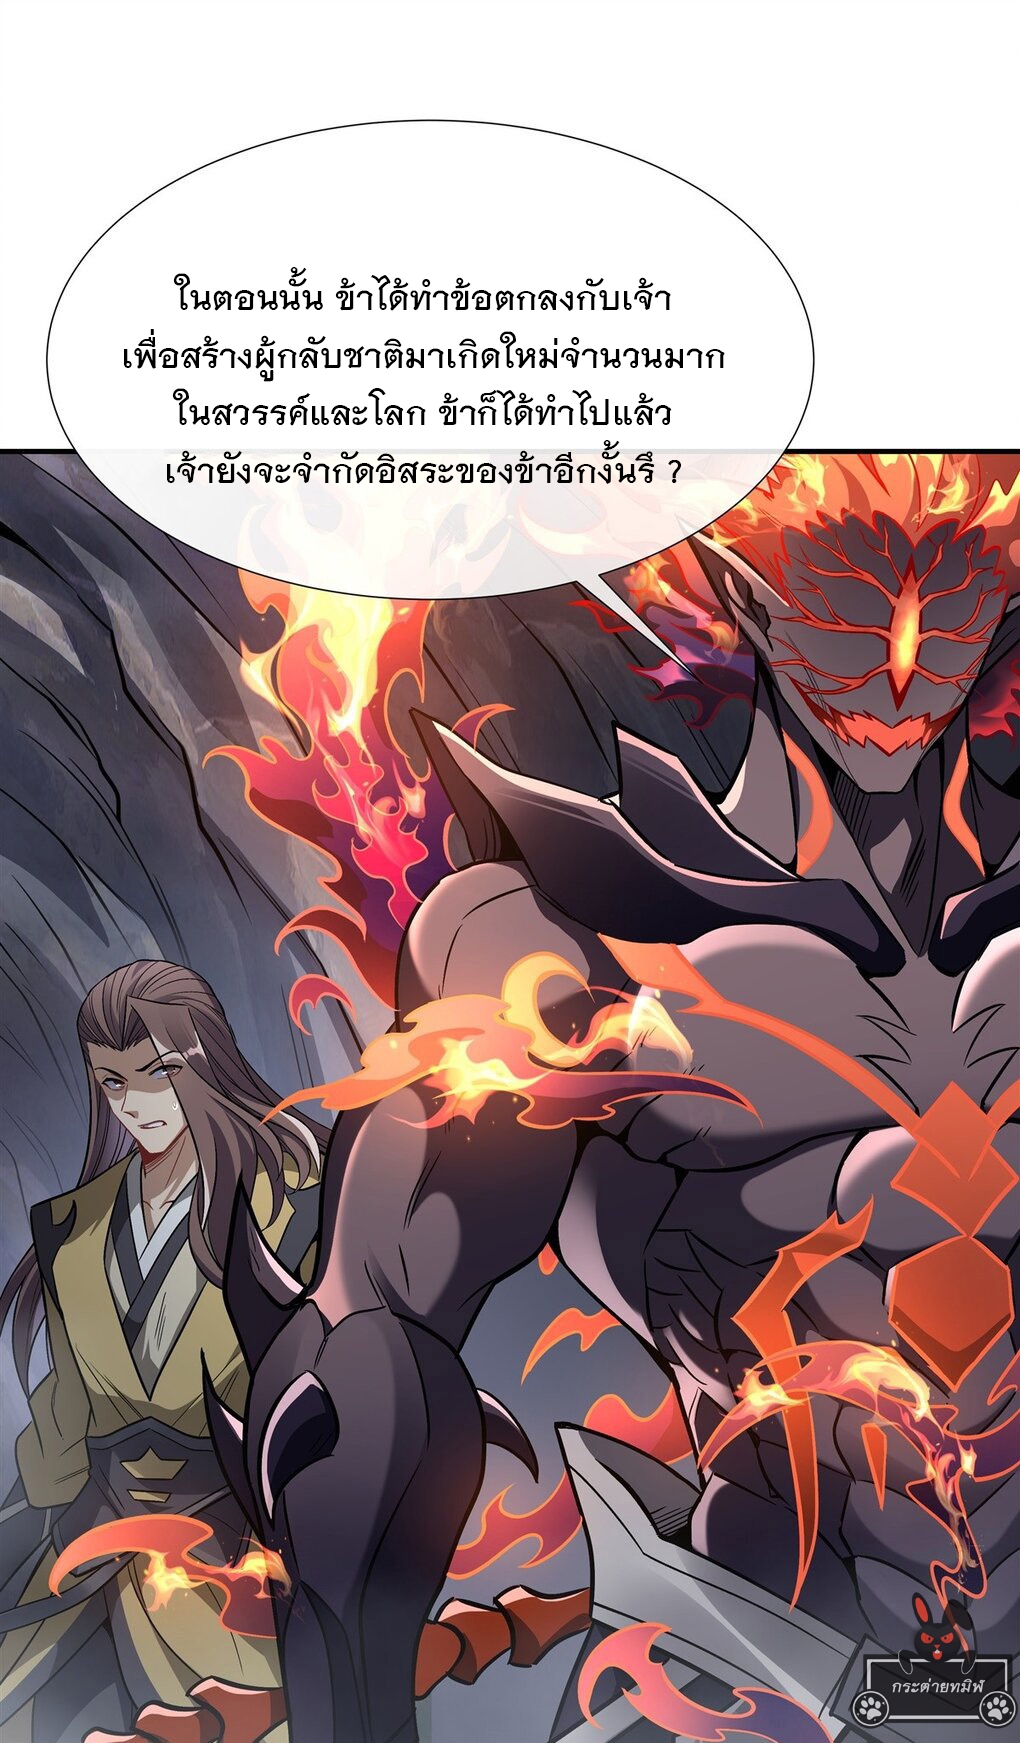 My Female Apprentices Are All Big Shots From the Future Ã Â¸â€¢Ã Â¸Â­Ã Â¸â„¢Ã Â¸â€”Ã Â¸ÂµÃ Â¹Ë† 97 (18)